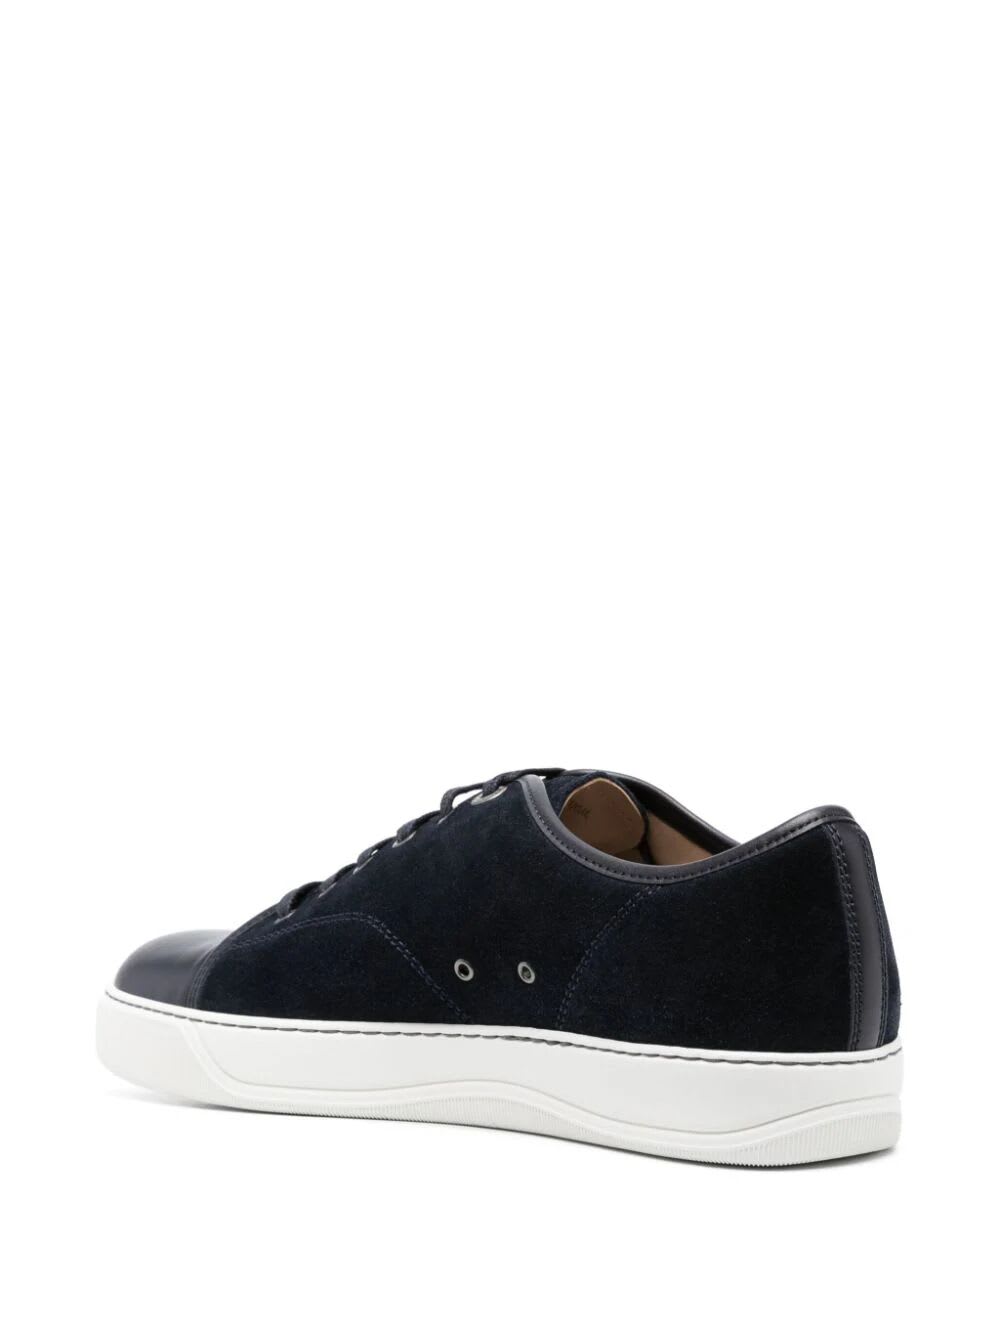 Shop Lanvin Suede And Nappa Captoe Low To Sneaker In Navy Blue